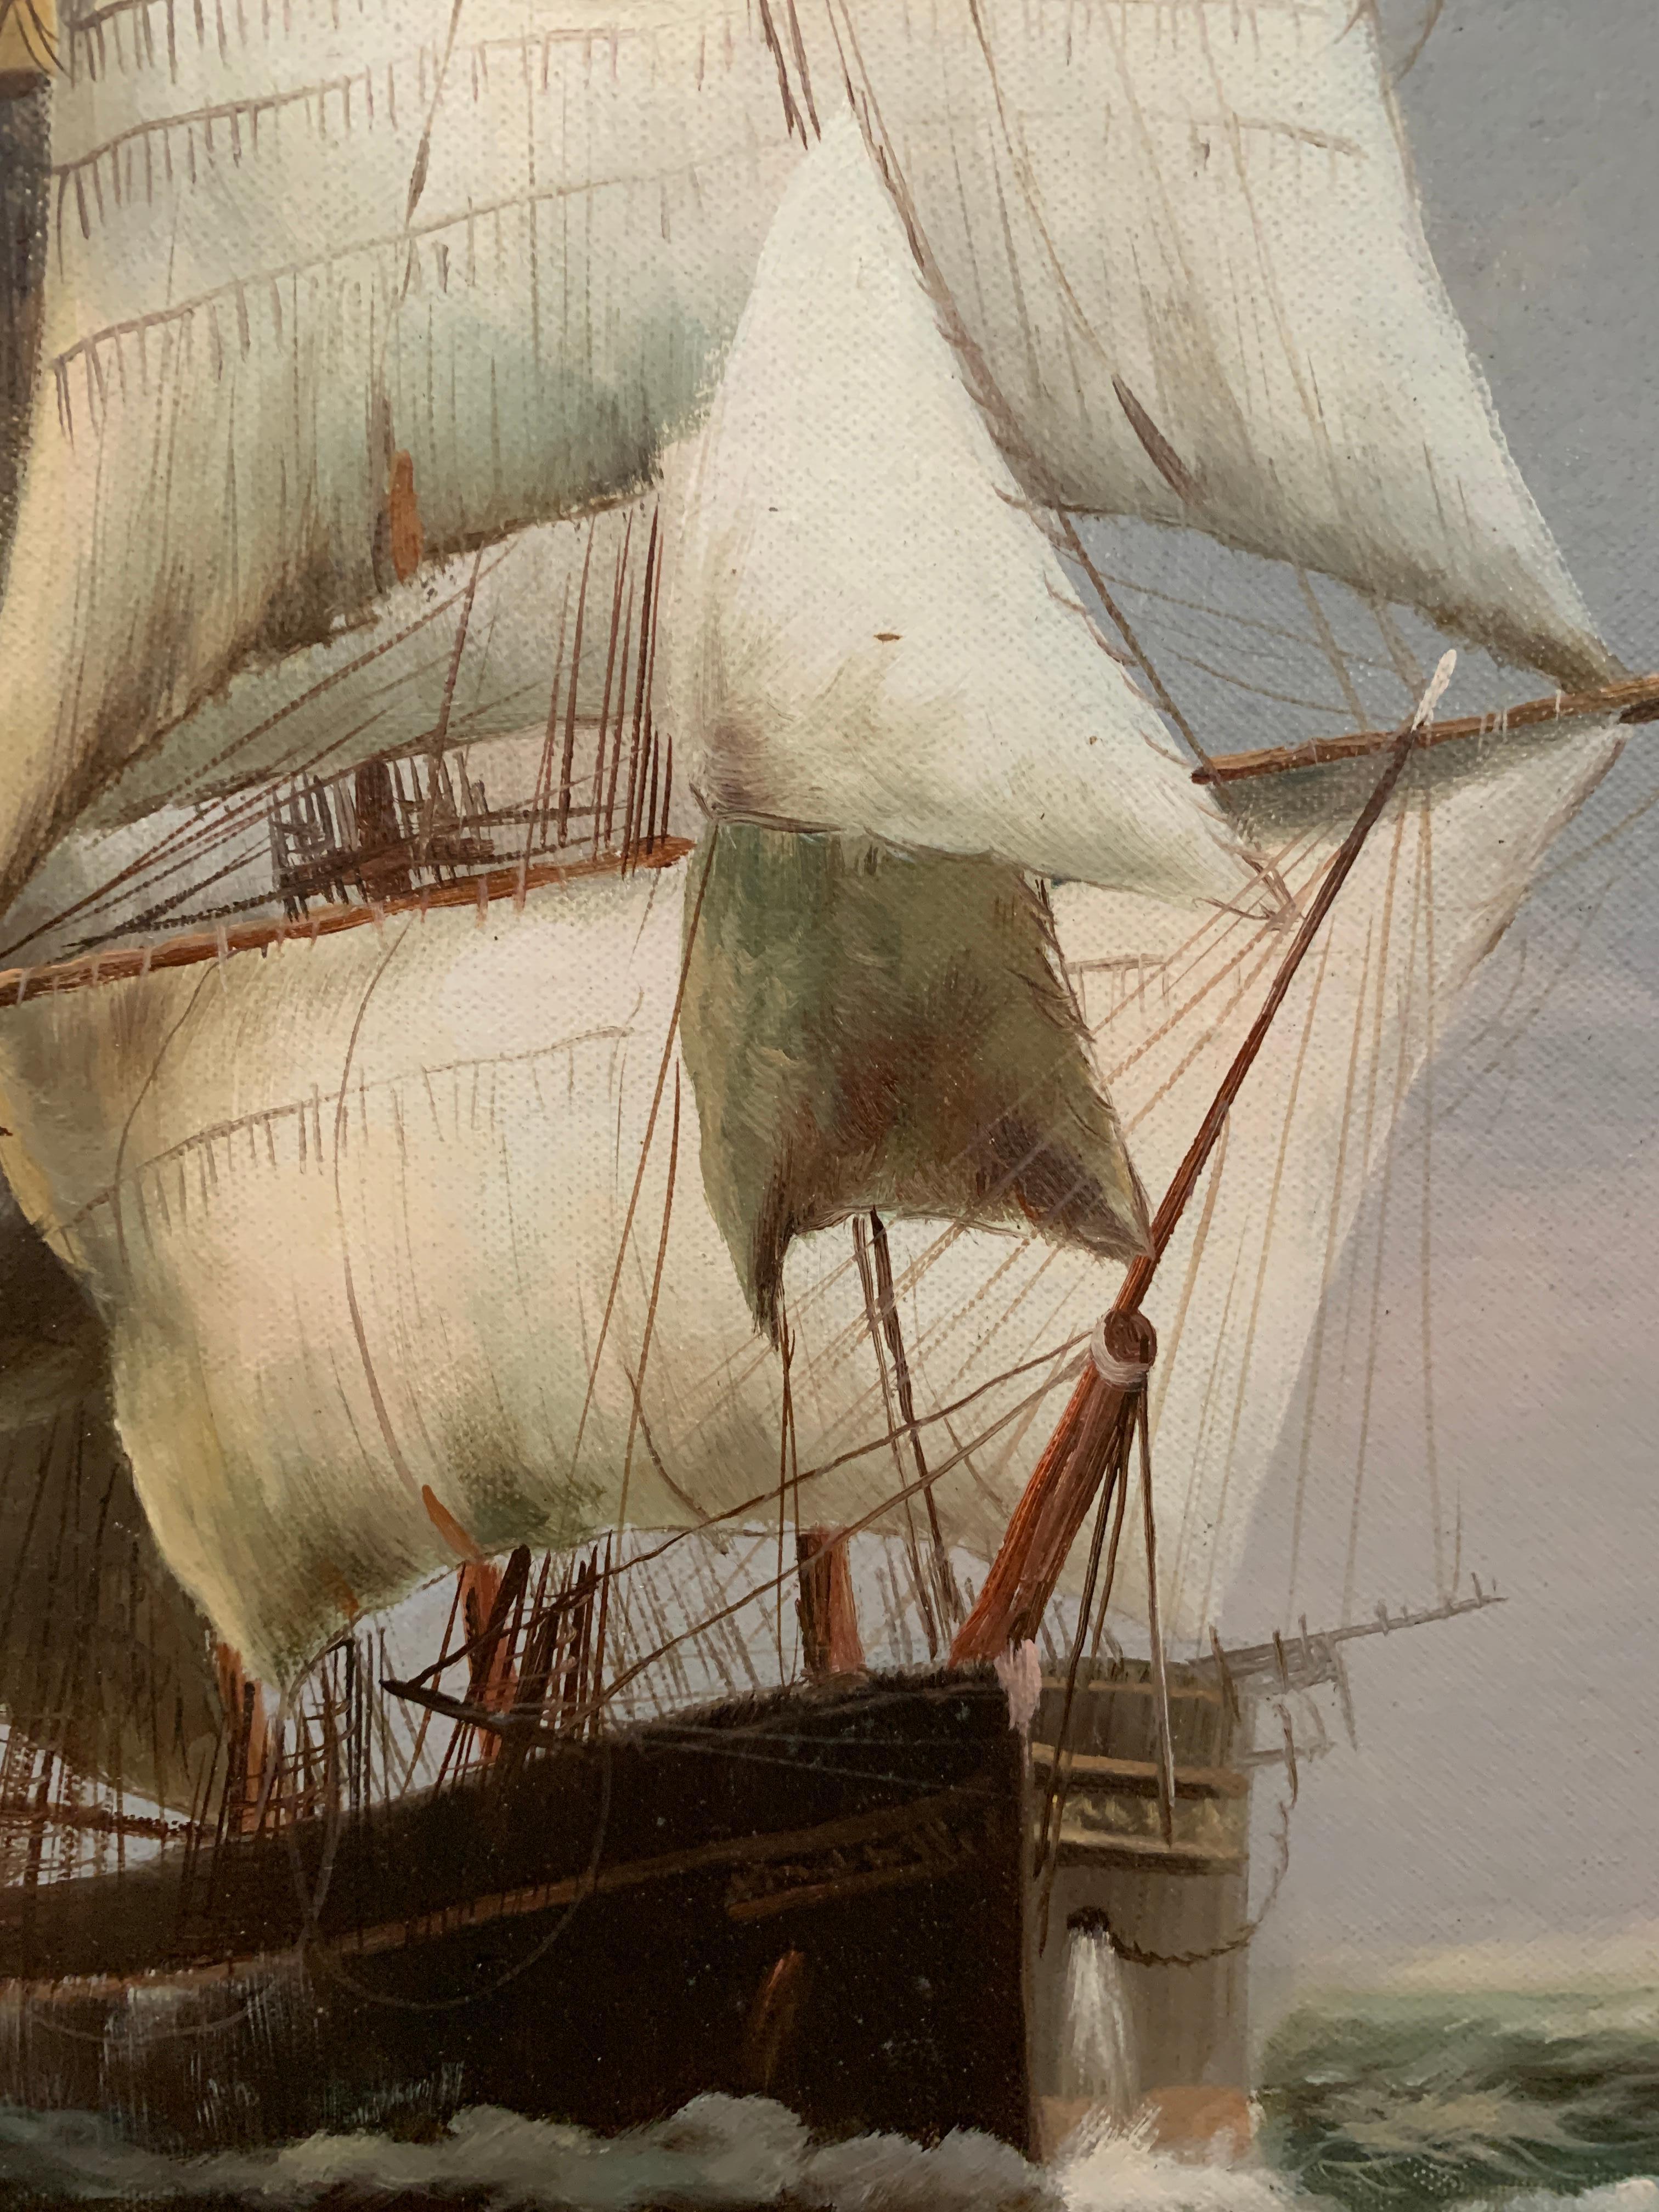 19th century style American tea clipper-sailboat at sea with a landscape beyond. 2